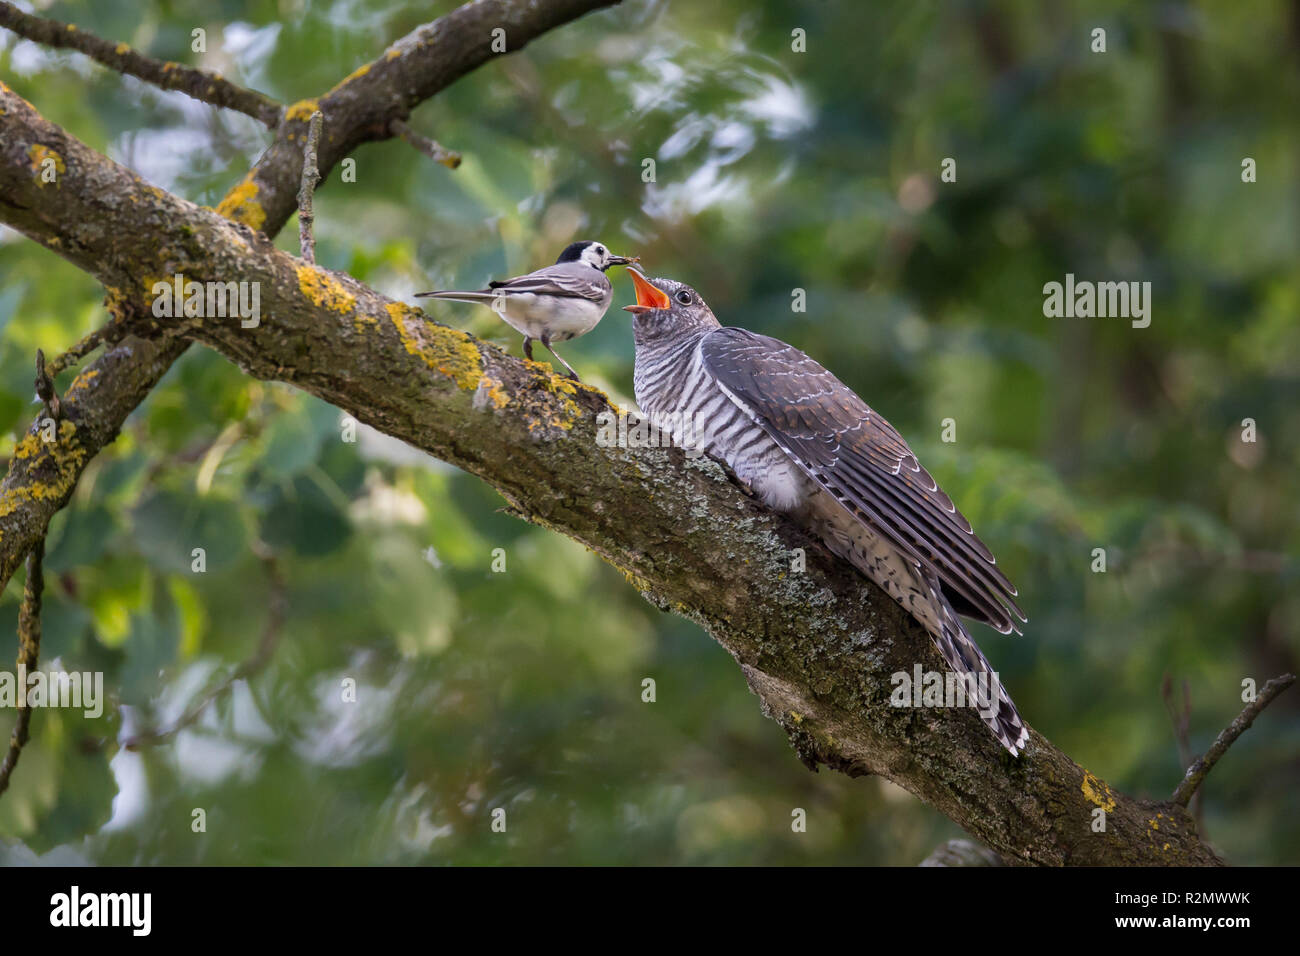 Cuckoo is fed by a wagtail Stock Photo